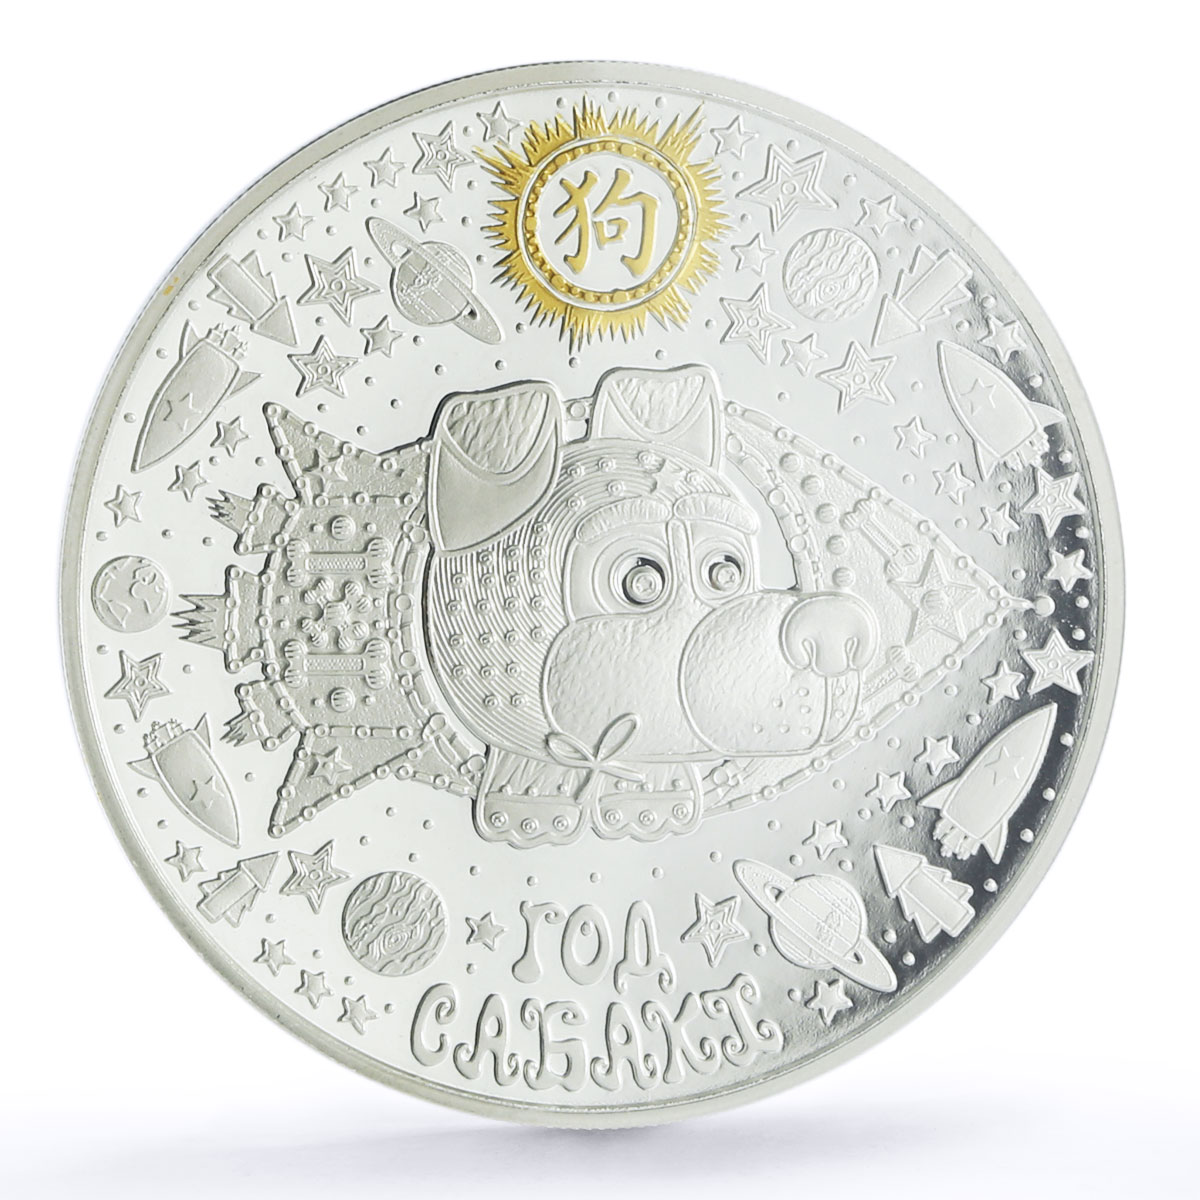 Belarus 20 rubles Chinese Calendar Year of the Dog PL70 PCGS silver coin 2017